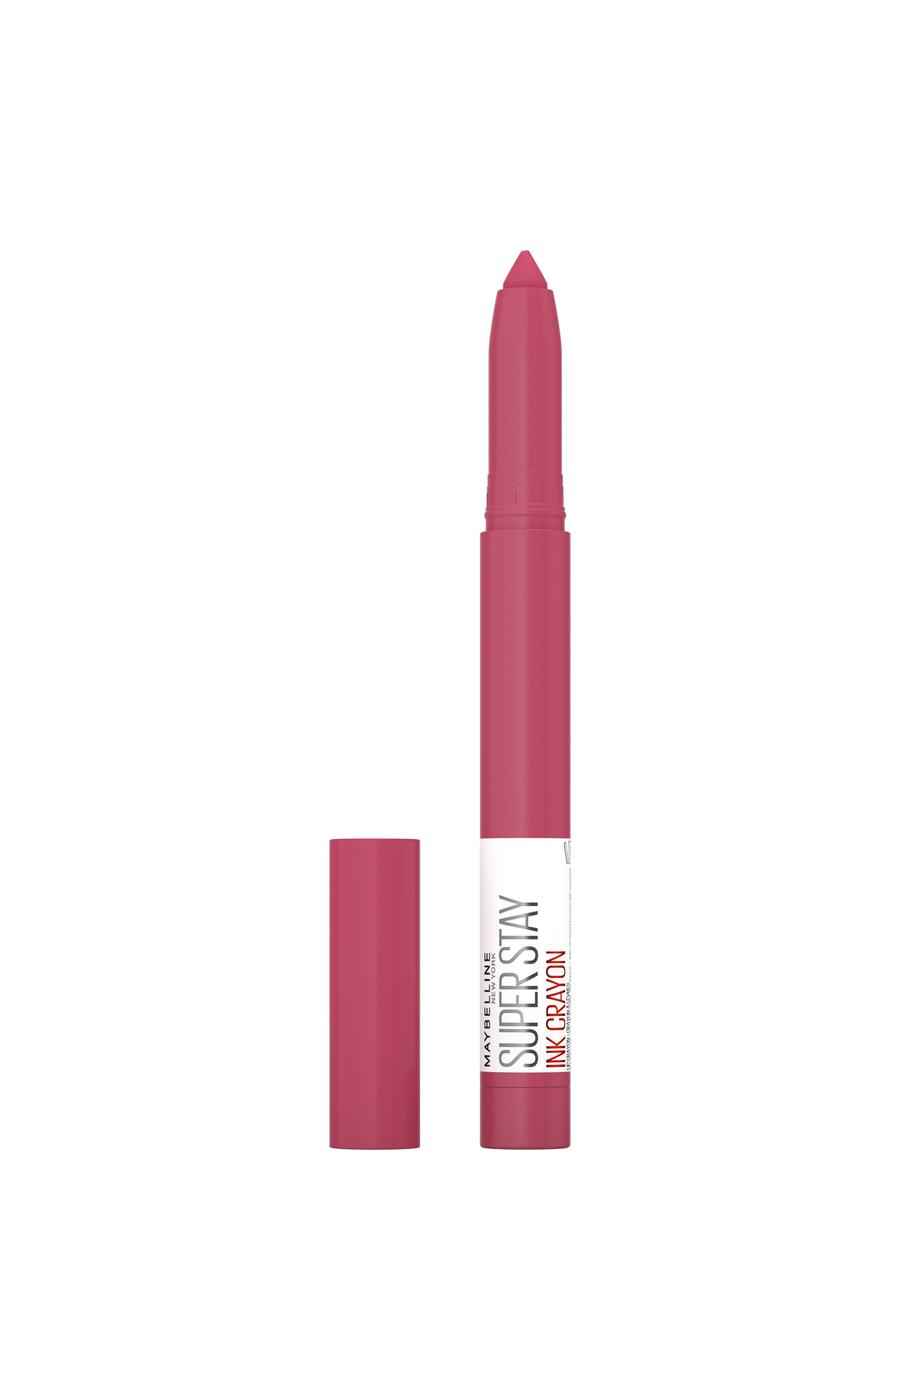 Maybelline Super Stay Ink Crayon Lipstick - Chase Dreams; image 1 of 2